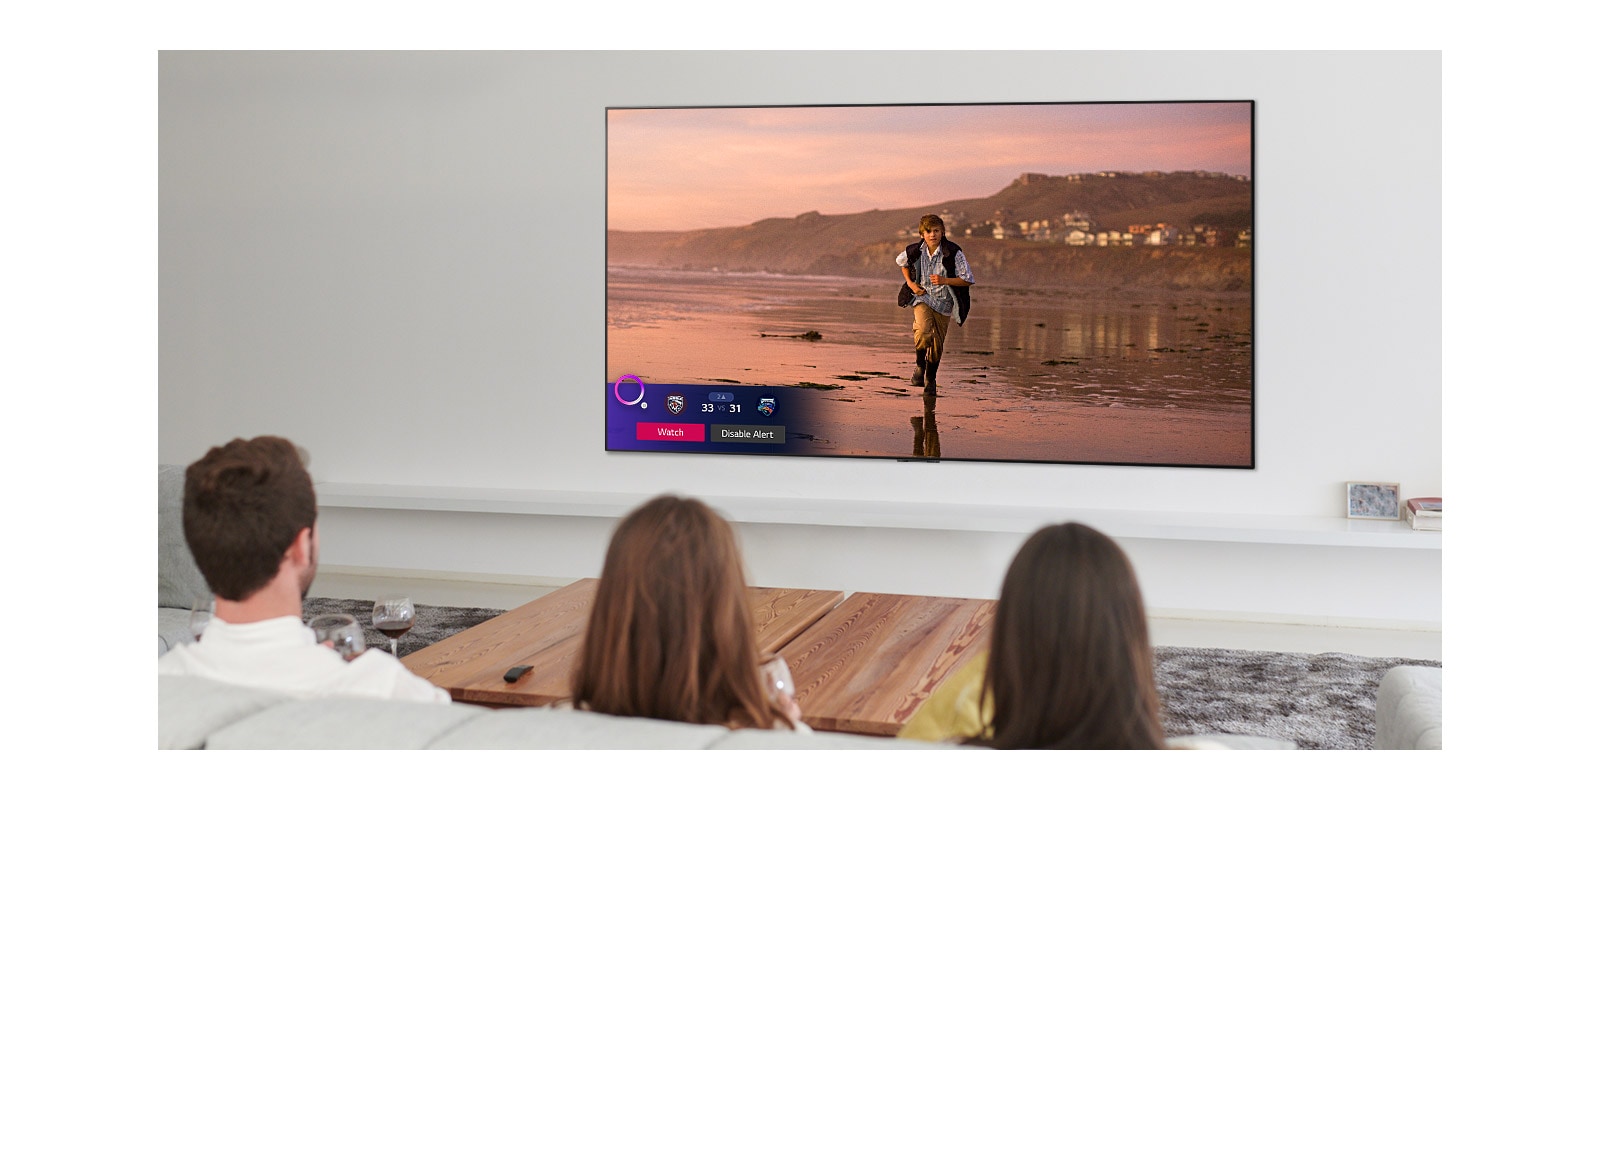 Three people watching TV screen showing a scene from a fantasy movie with a Sports Alert